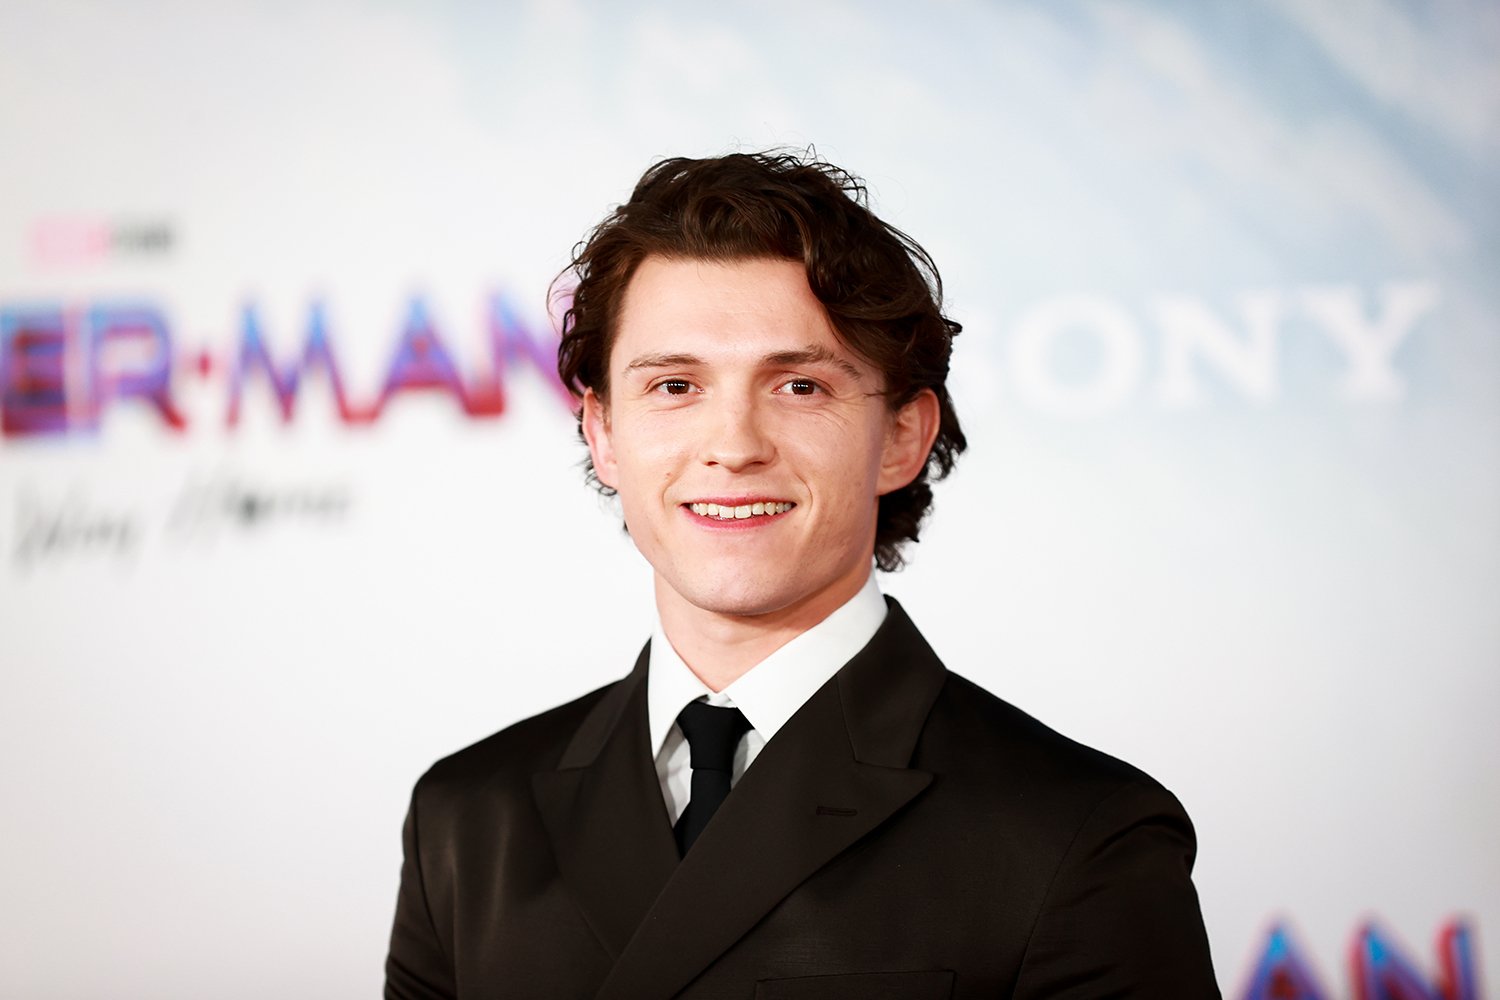 Tom Holland at the Spider-Man: No Way Home Los Angeles premiere